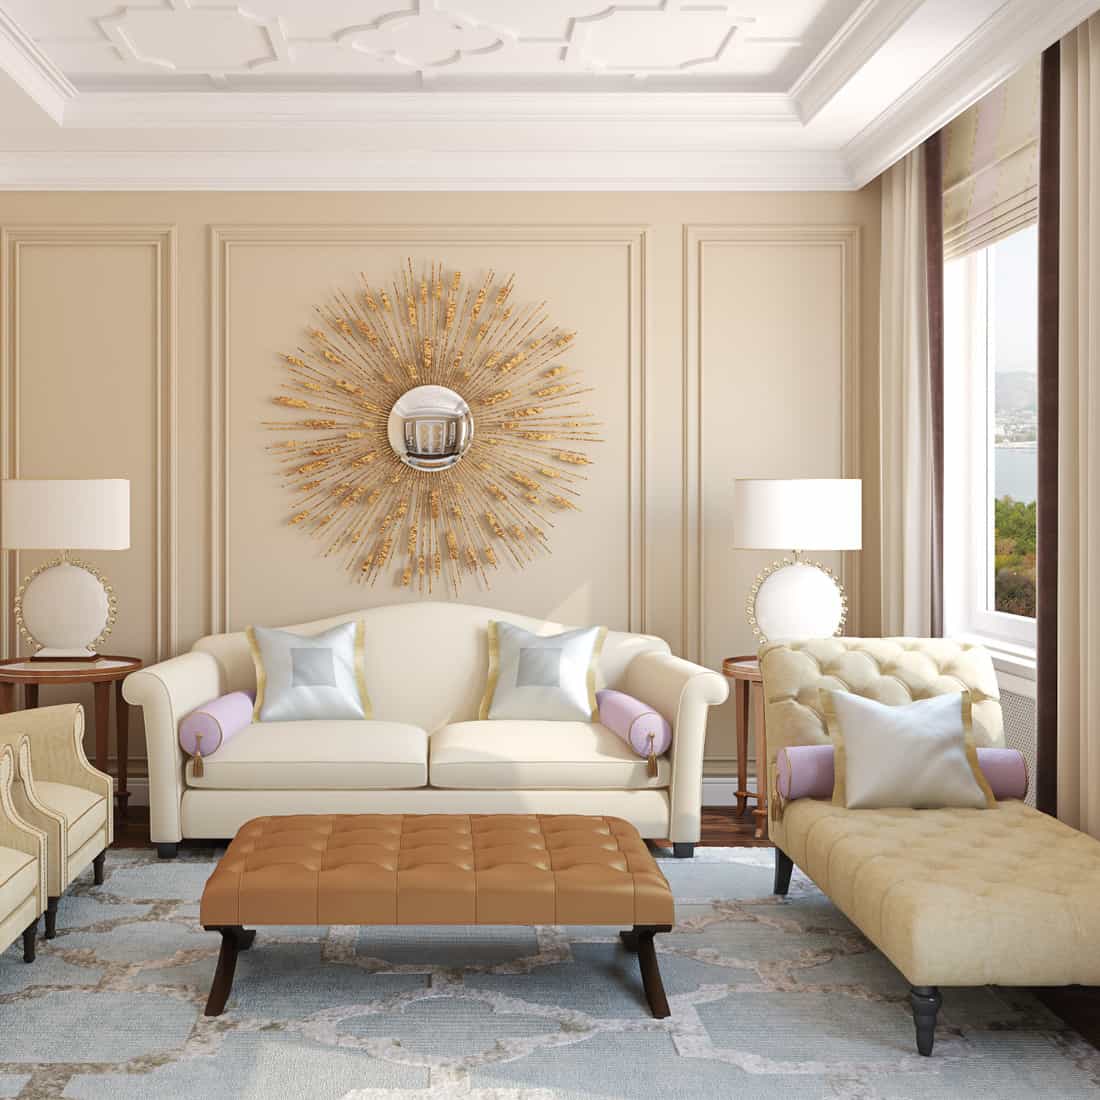 Beige colored furniture in a living room, walls with moulding and upholstered center table